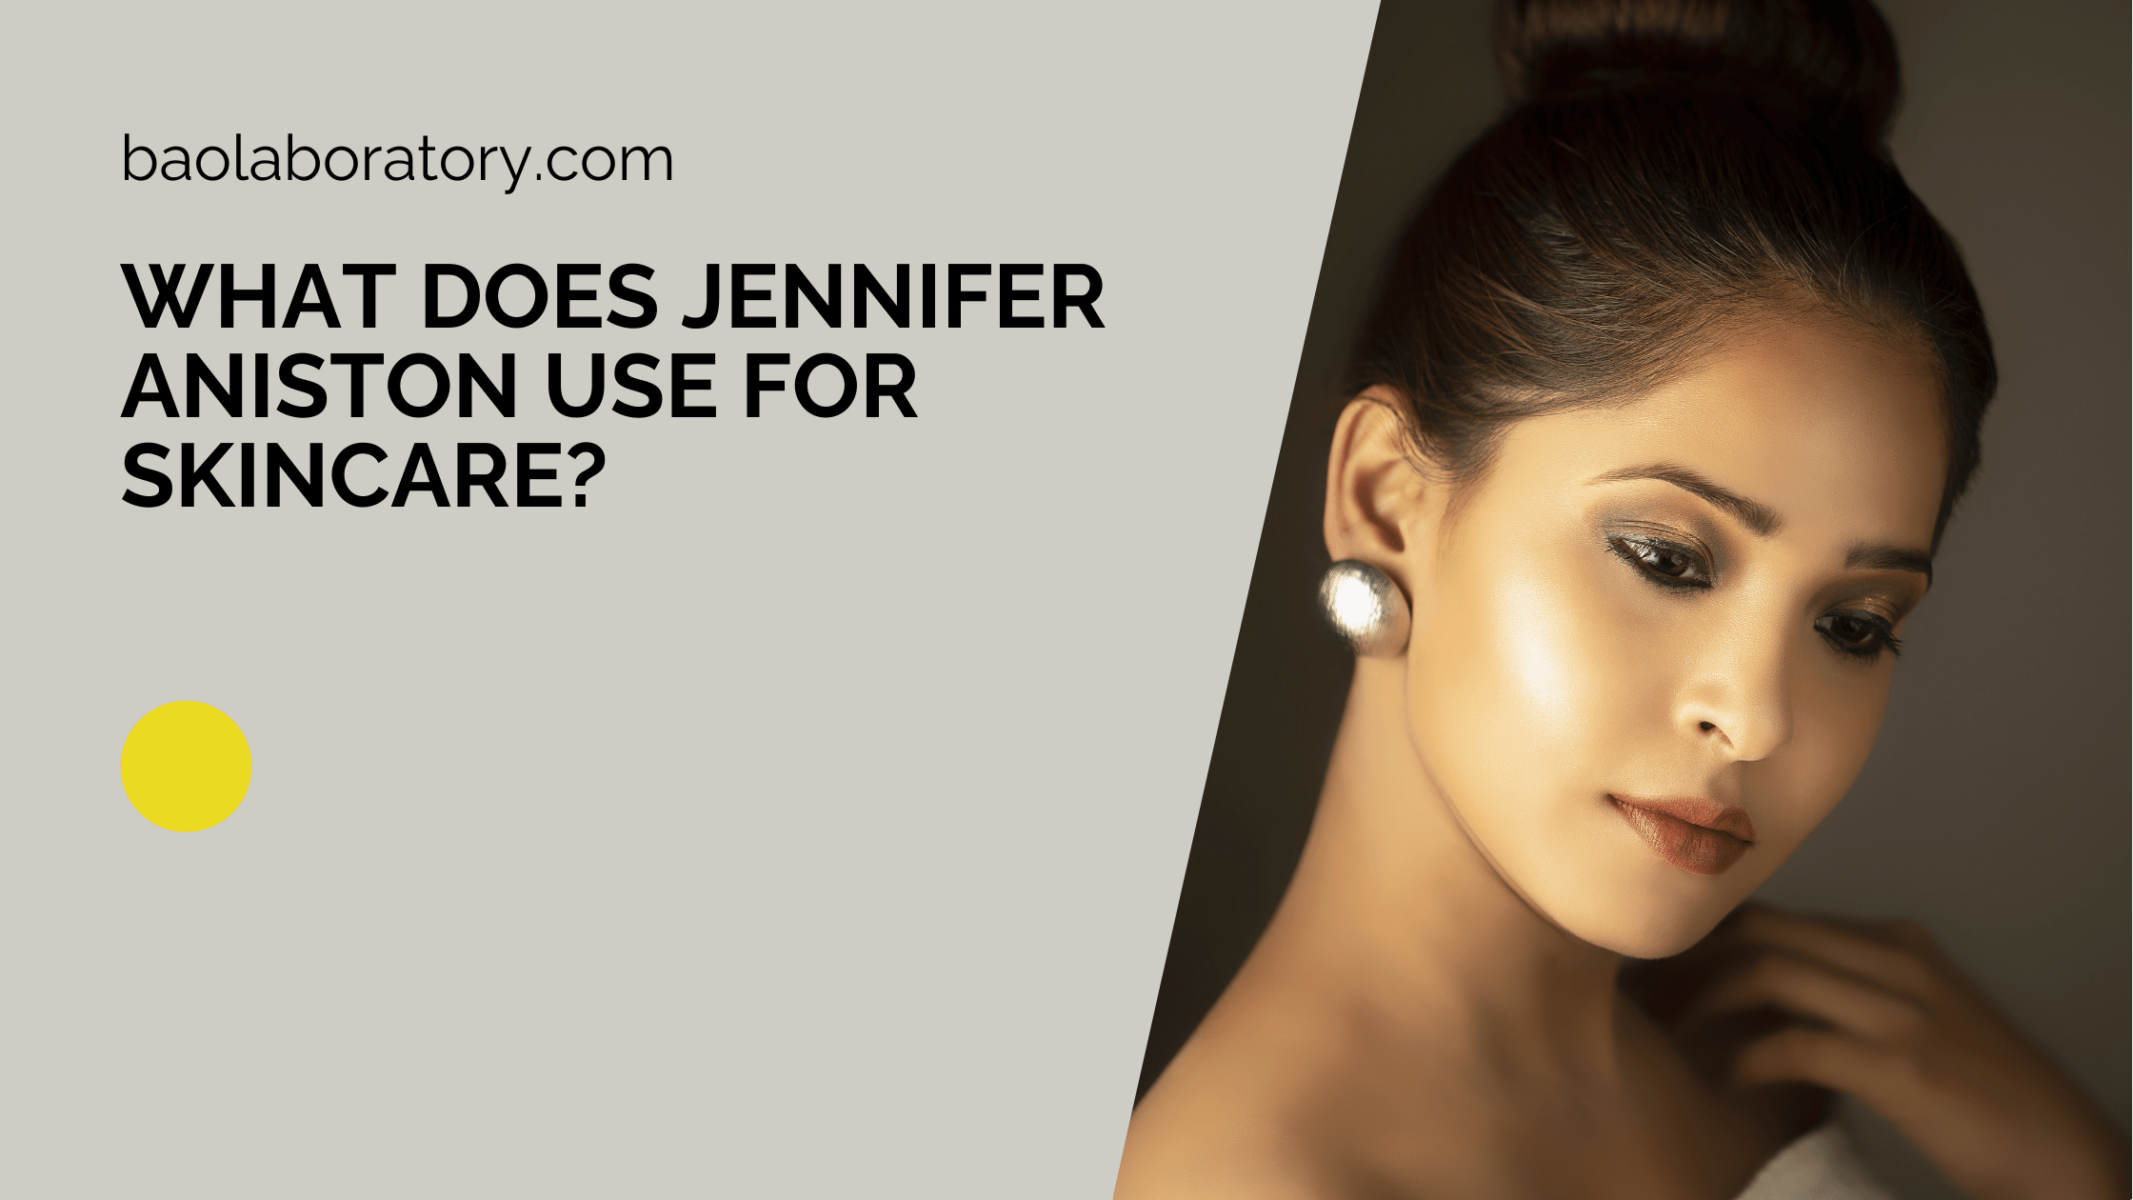 What Does Jennifer Aniston Use for Skincare